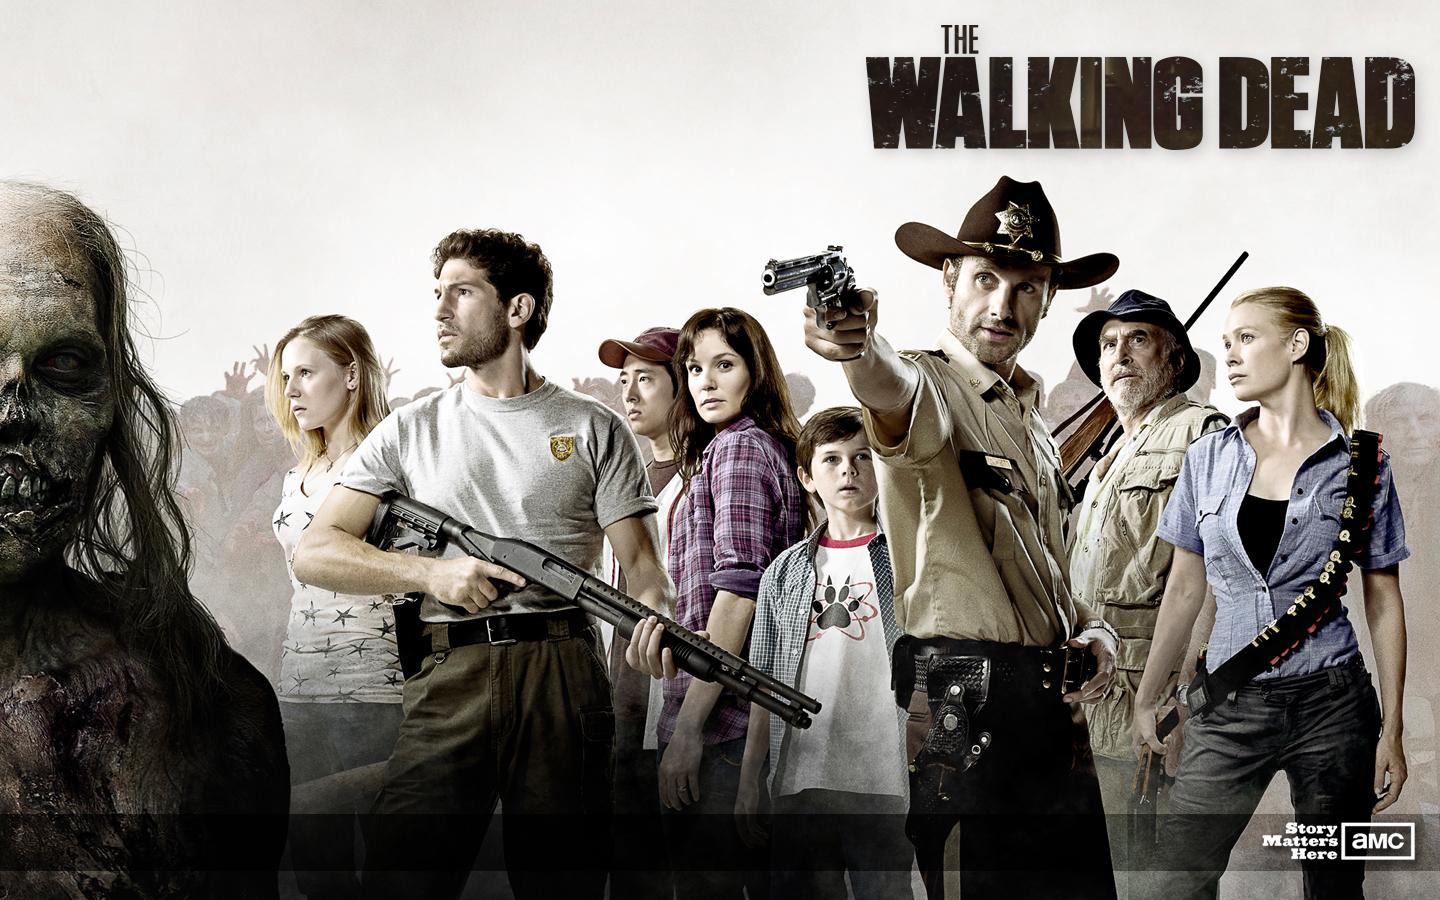 The Walking Dead Is A Television Drama Series Developed By Frank